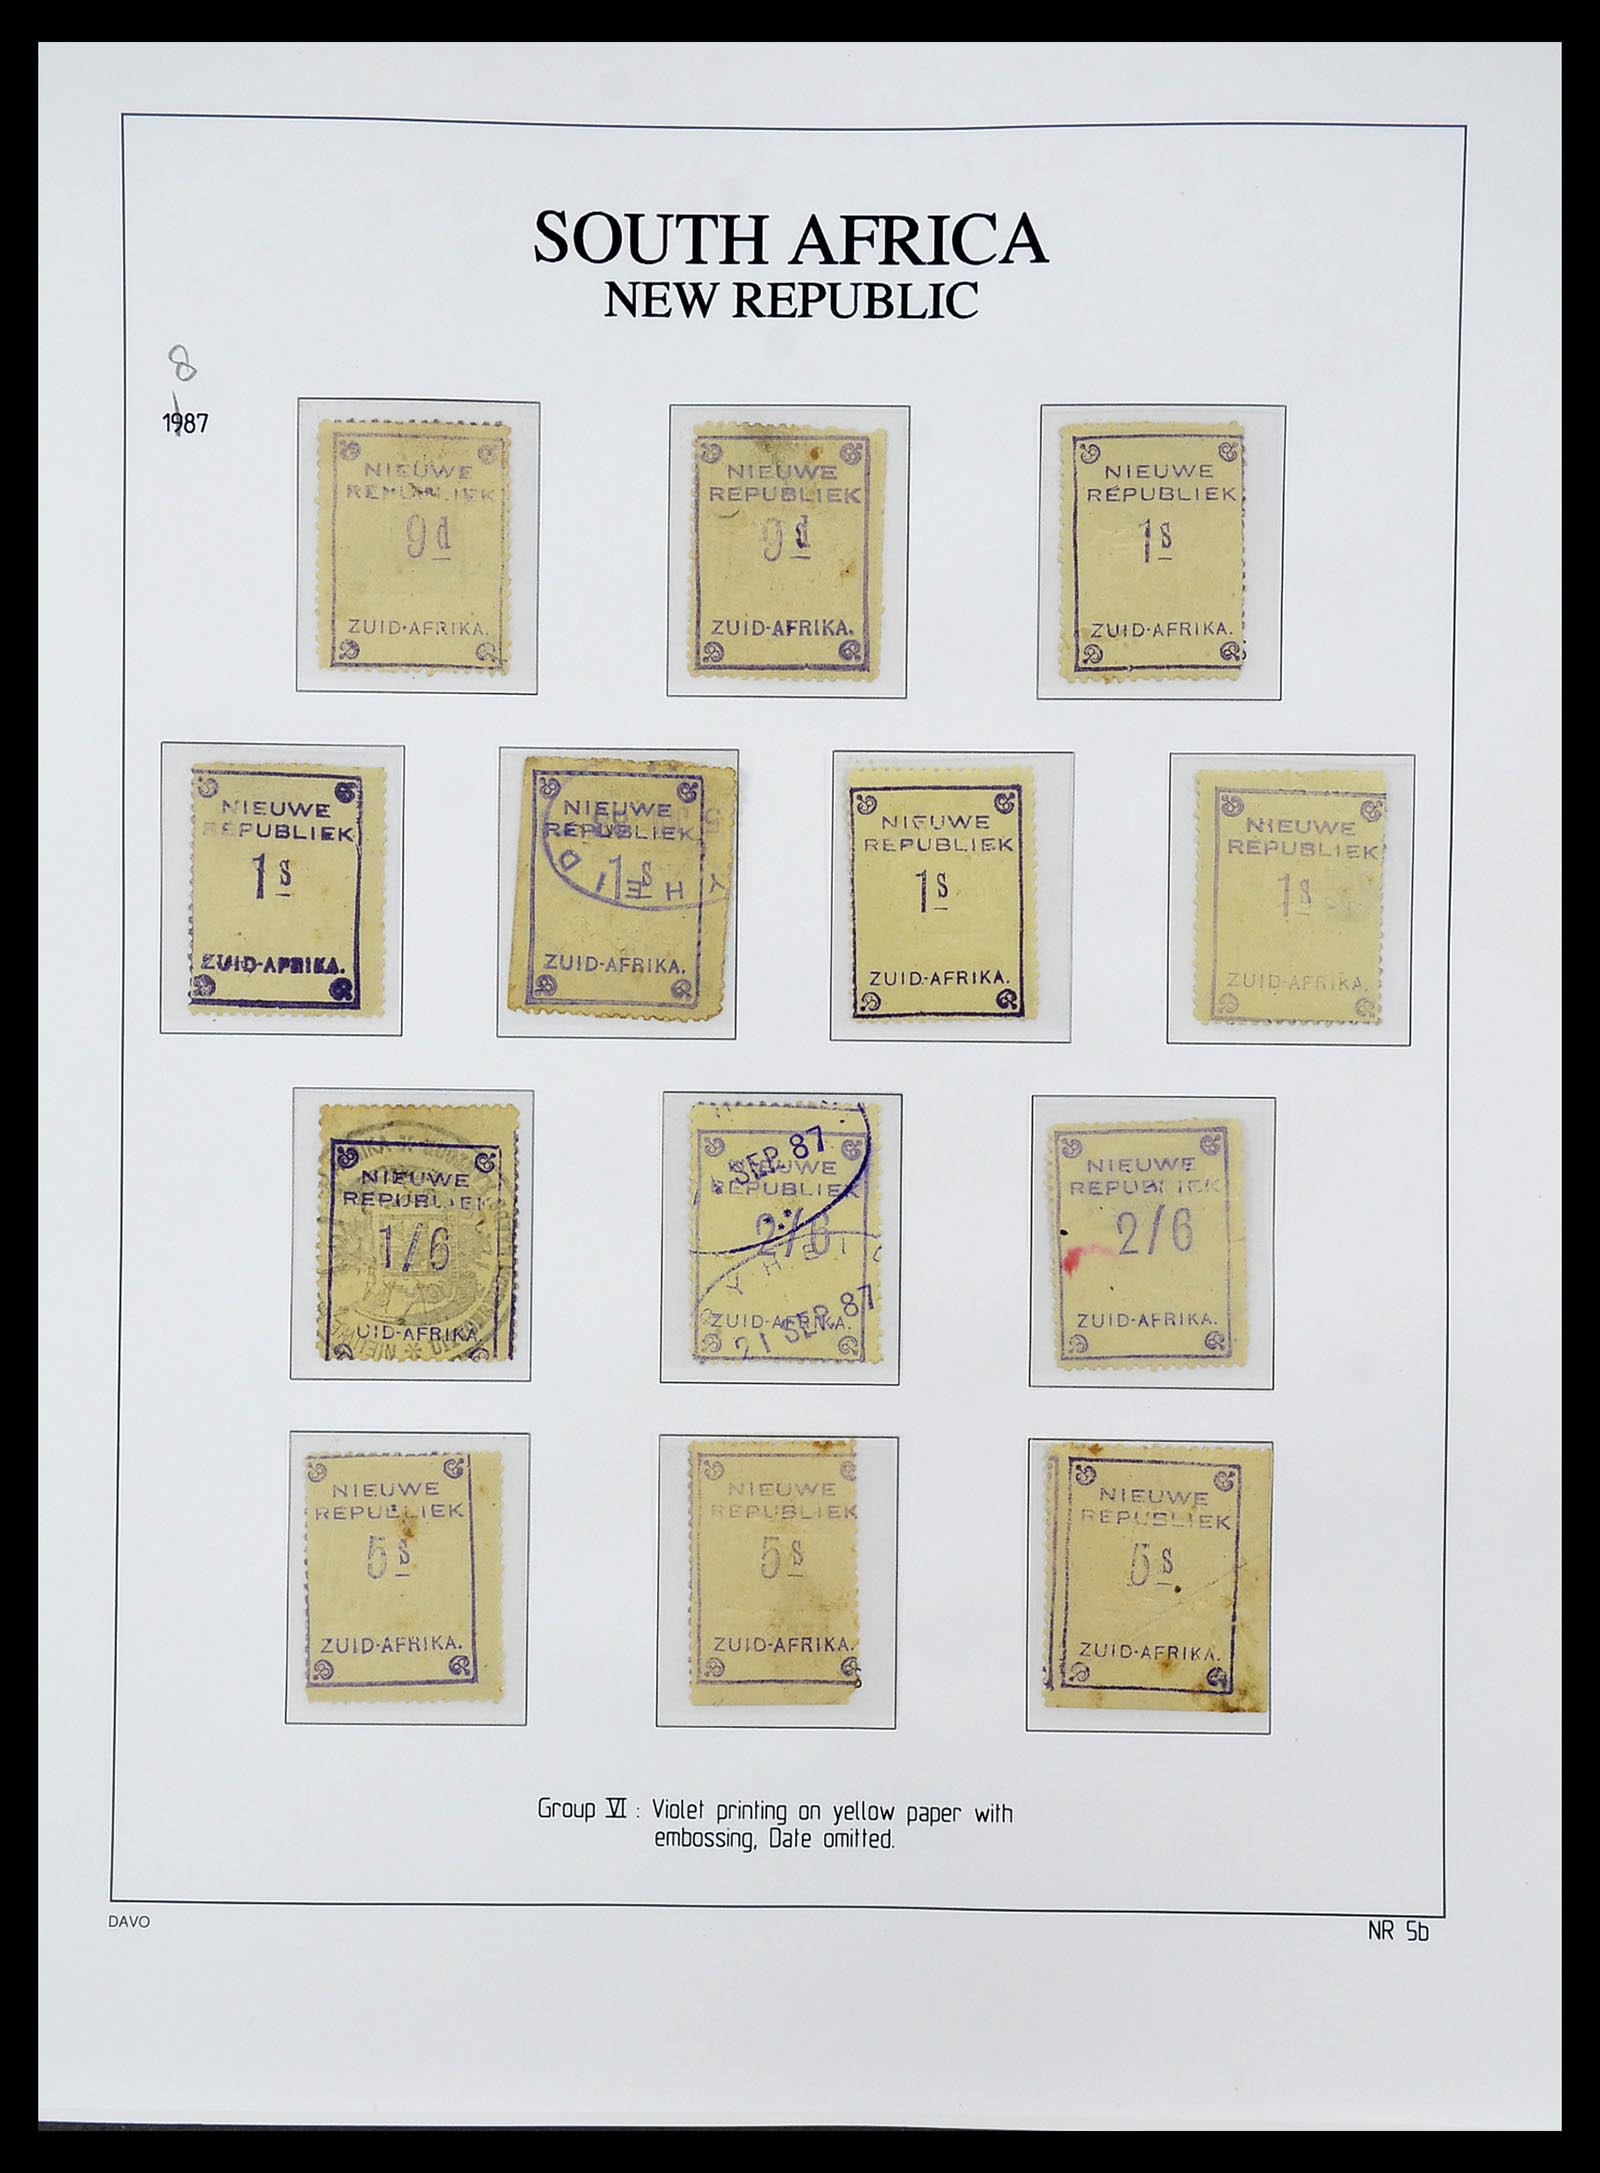 34680 007 - Stamp Collection 34680 South Africa New Republic 1886-1887.